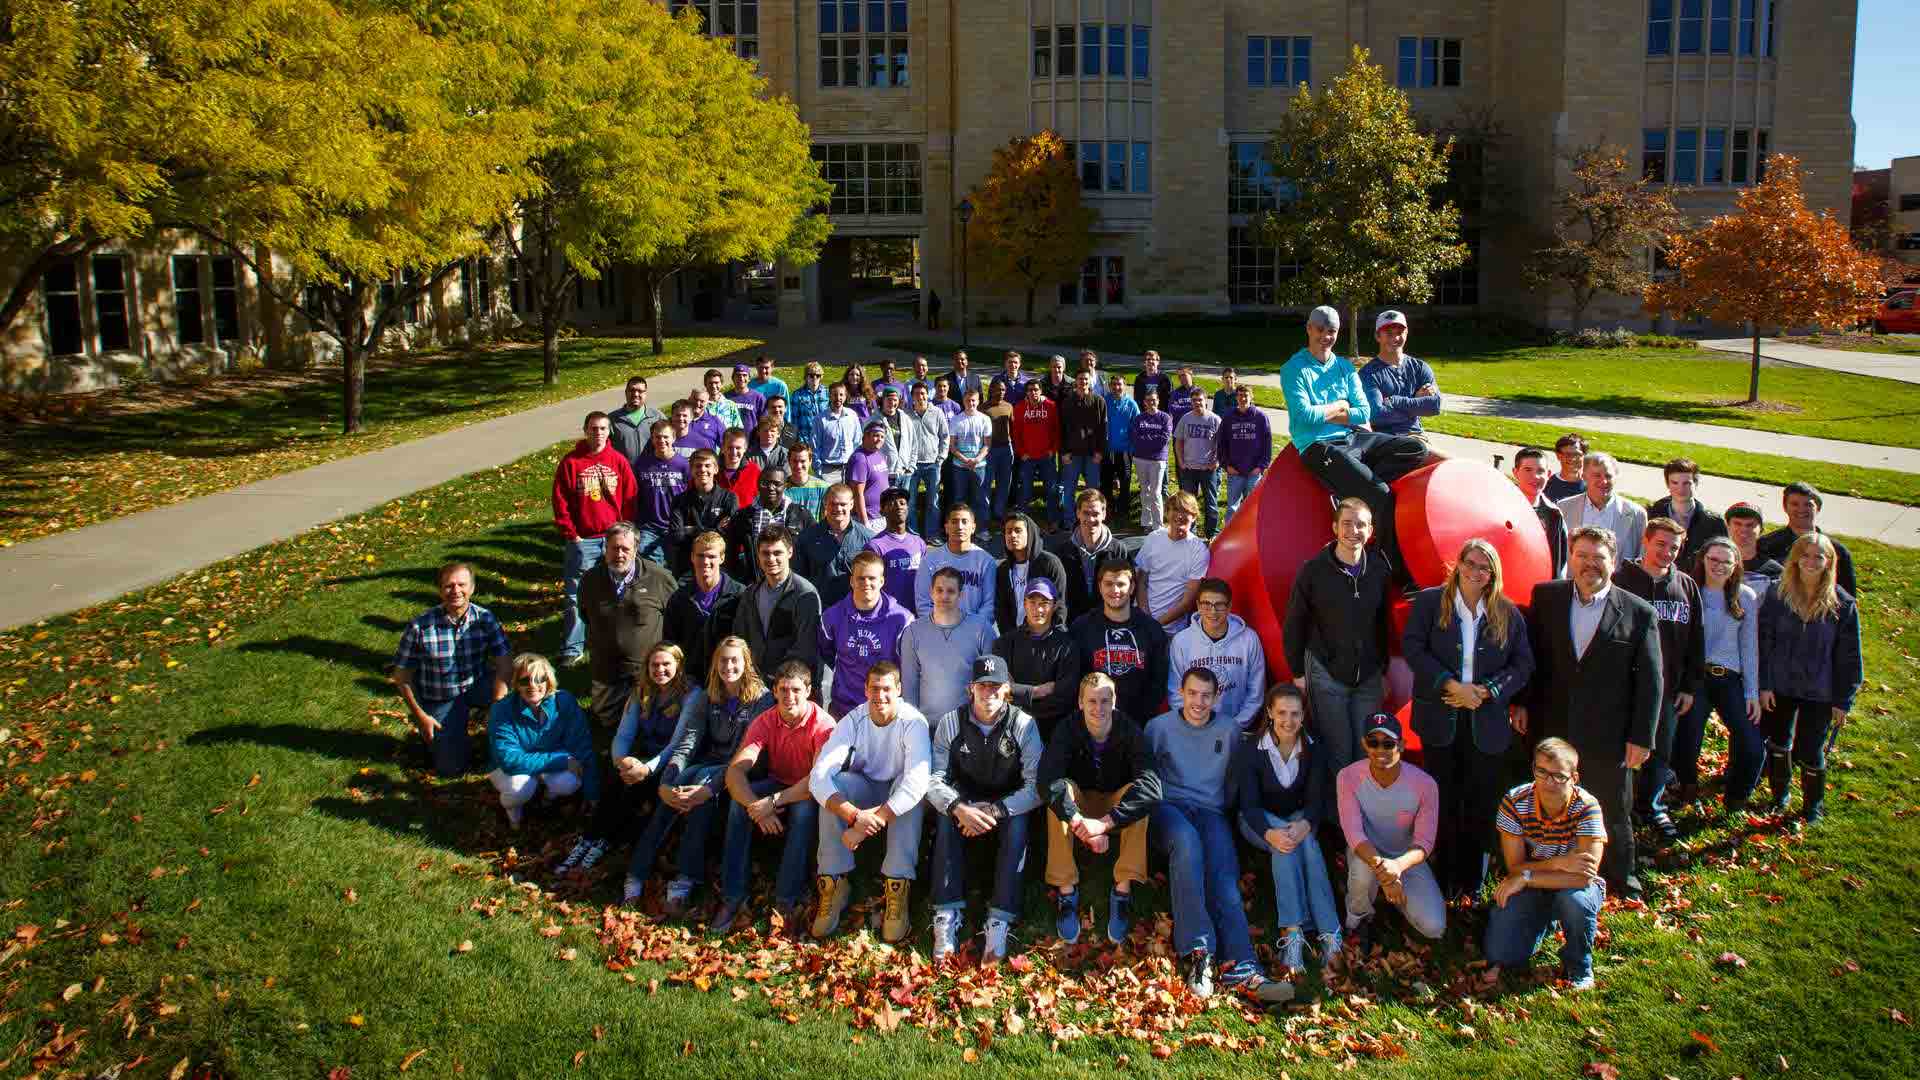 School of Engineering students stand next to "The Plunge" sculpture.